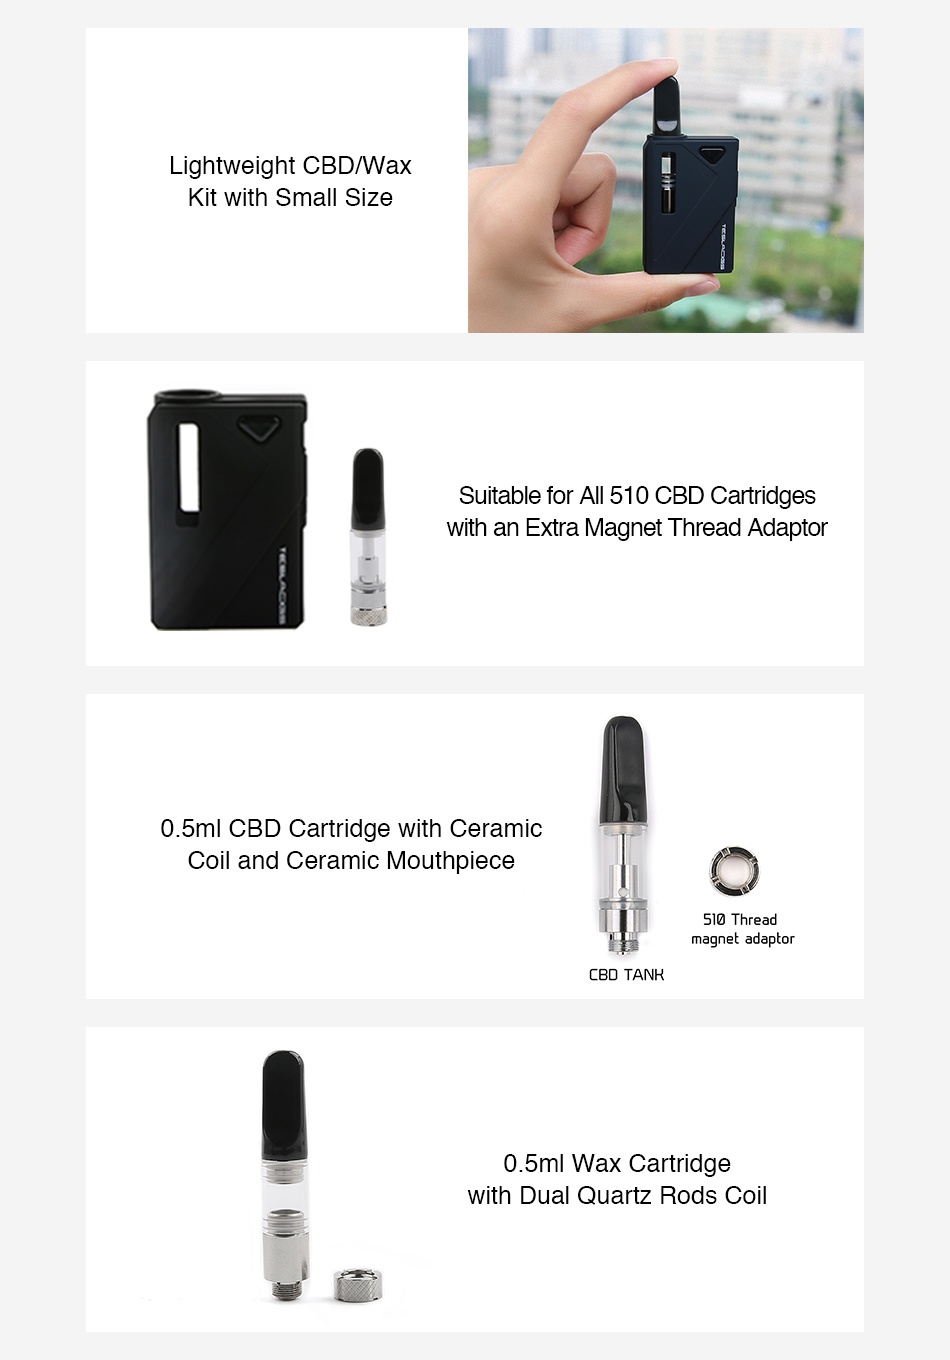 Tesla Mini DUO CBD/Wax Kit 500mAh Lightweight CBD ax it with small size Suitable for All 510 CBD Cartridges ch an Extra Magnet Thread Adaptor 05ml cBd Cartridge with ceramic Coil and ceramic Mouthpiece 510 Thread magnet adaptor CBD TANR 05ml Wax Cartridge ith dual quartz rods ce